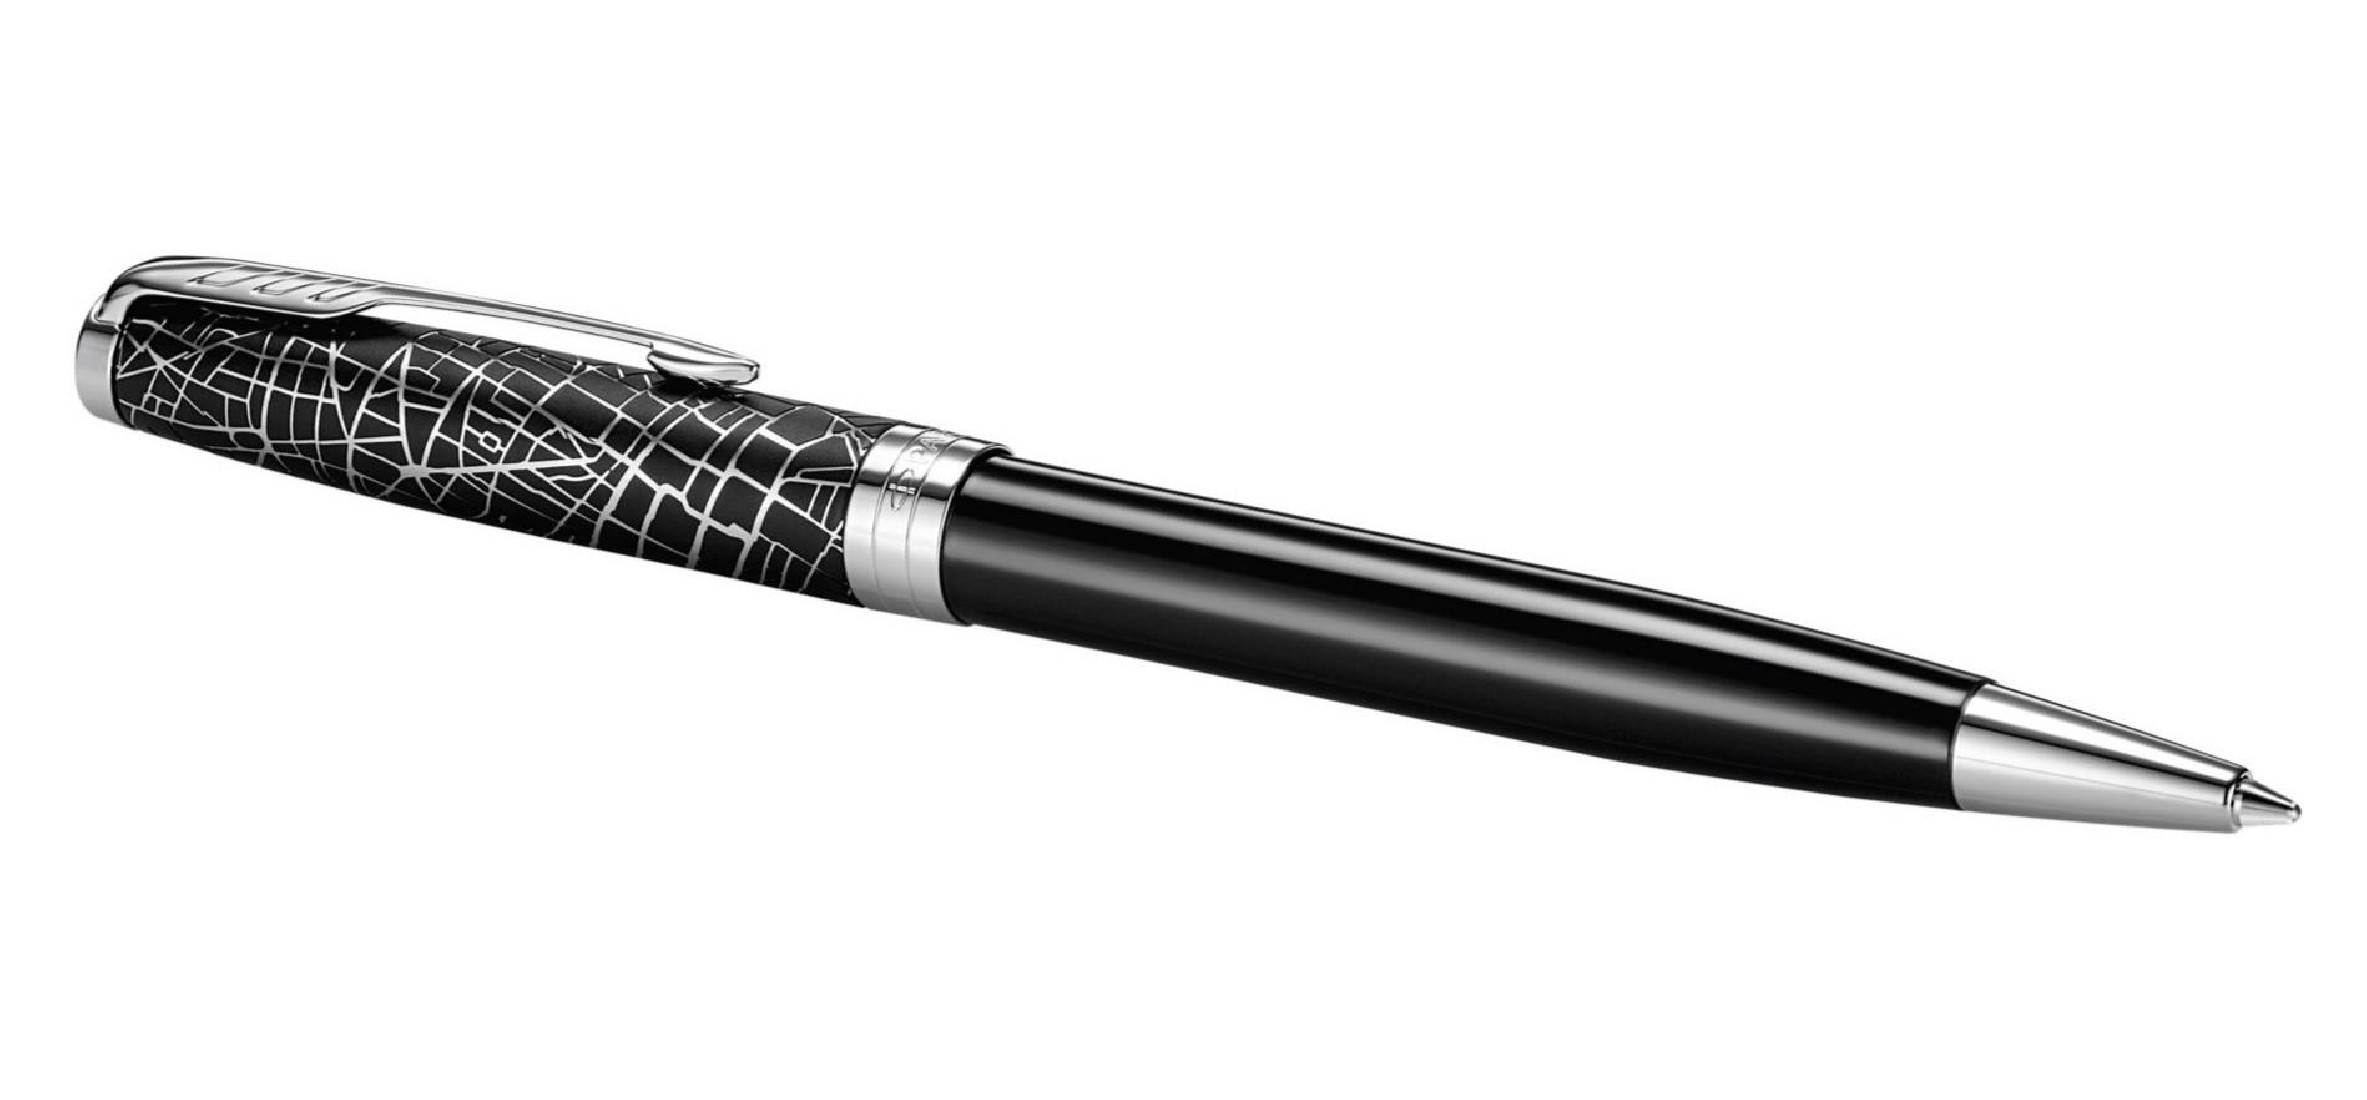 PARKER SONNET SPECIAL EDITION METRO CT BALLPOINT